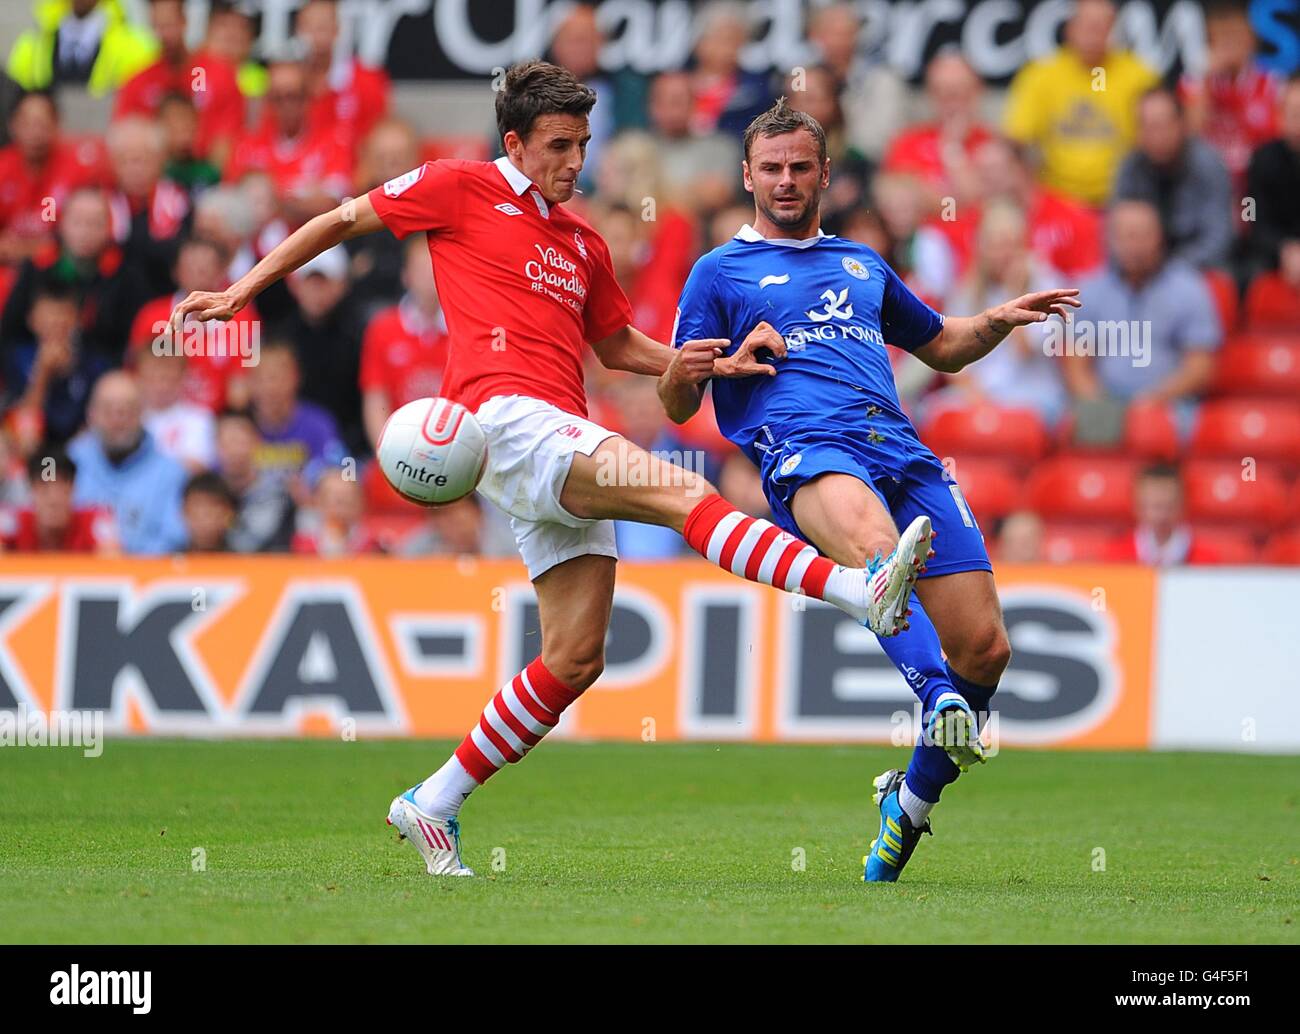 Nottingham Forest's Matt Derbyshire (left) and Leicester City's Richard Wellens (right) in action Stock Photo